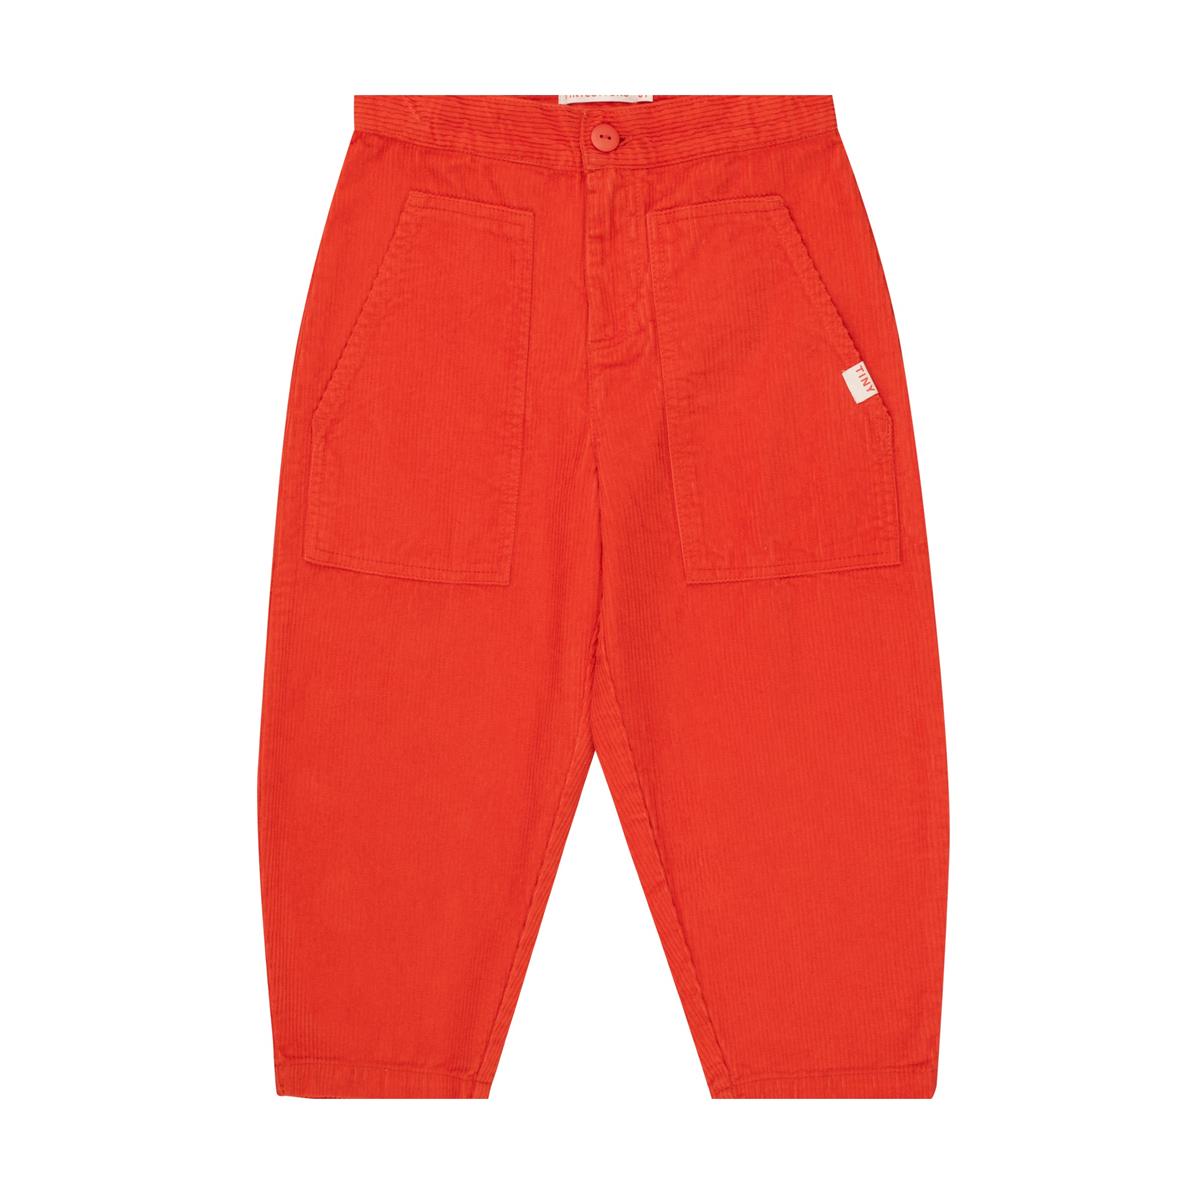 Tinycottons - CORDUROY PANT - red